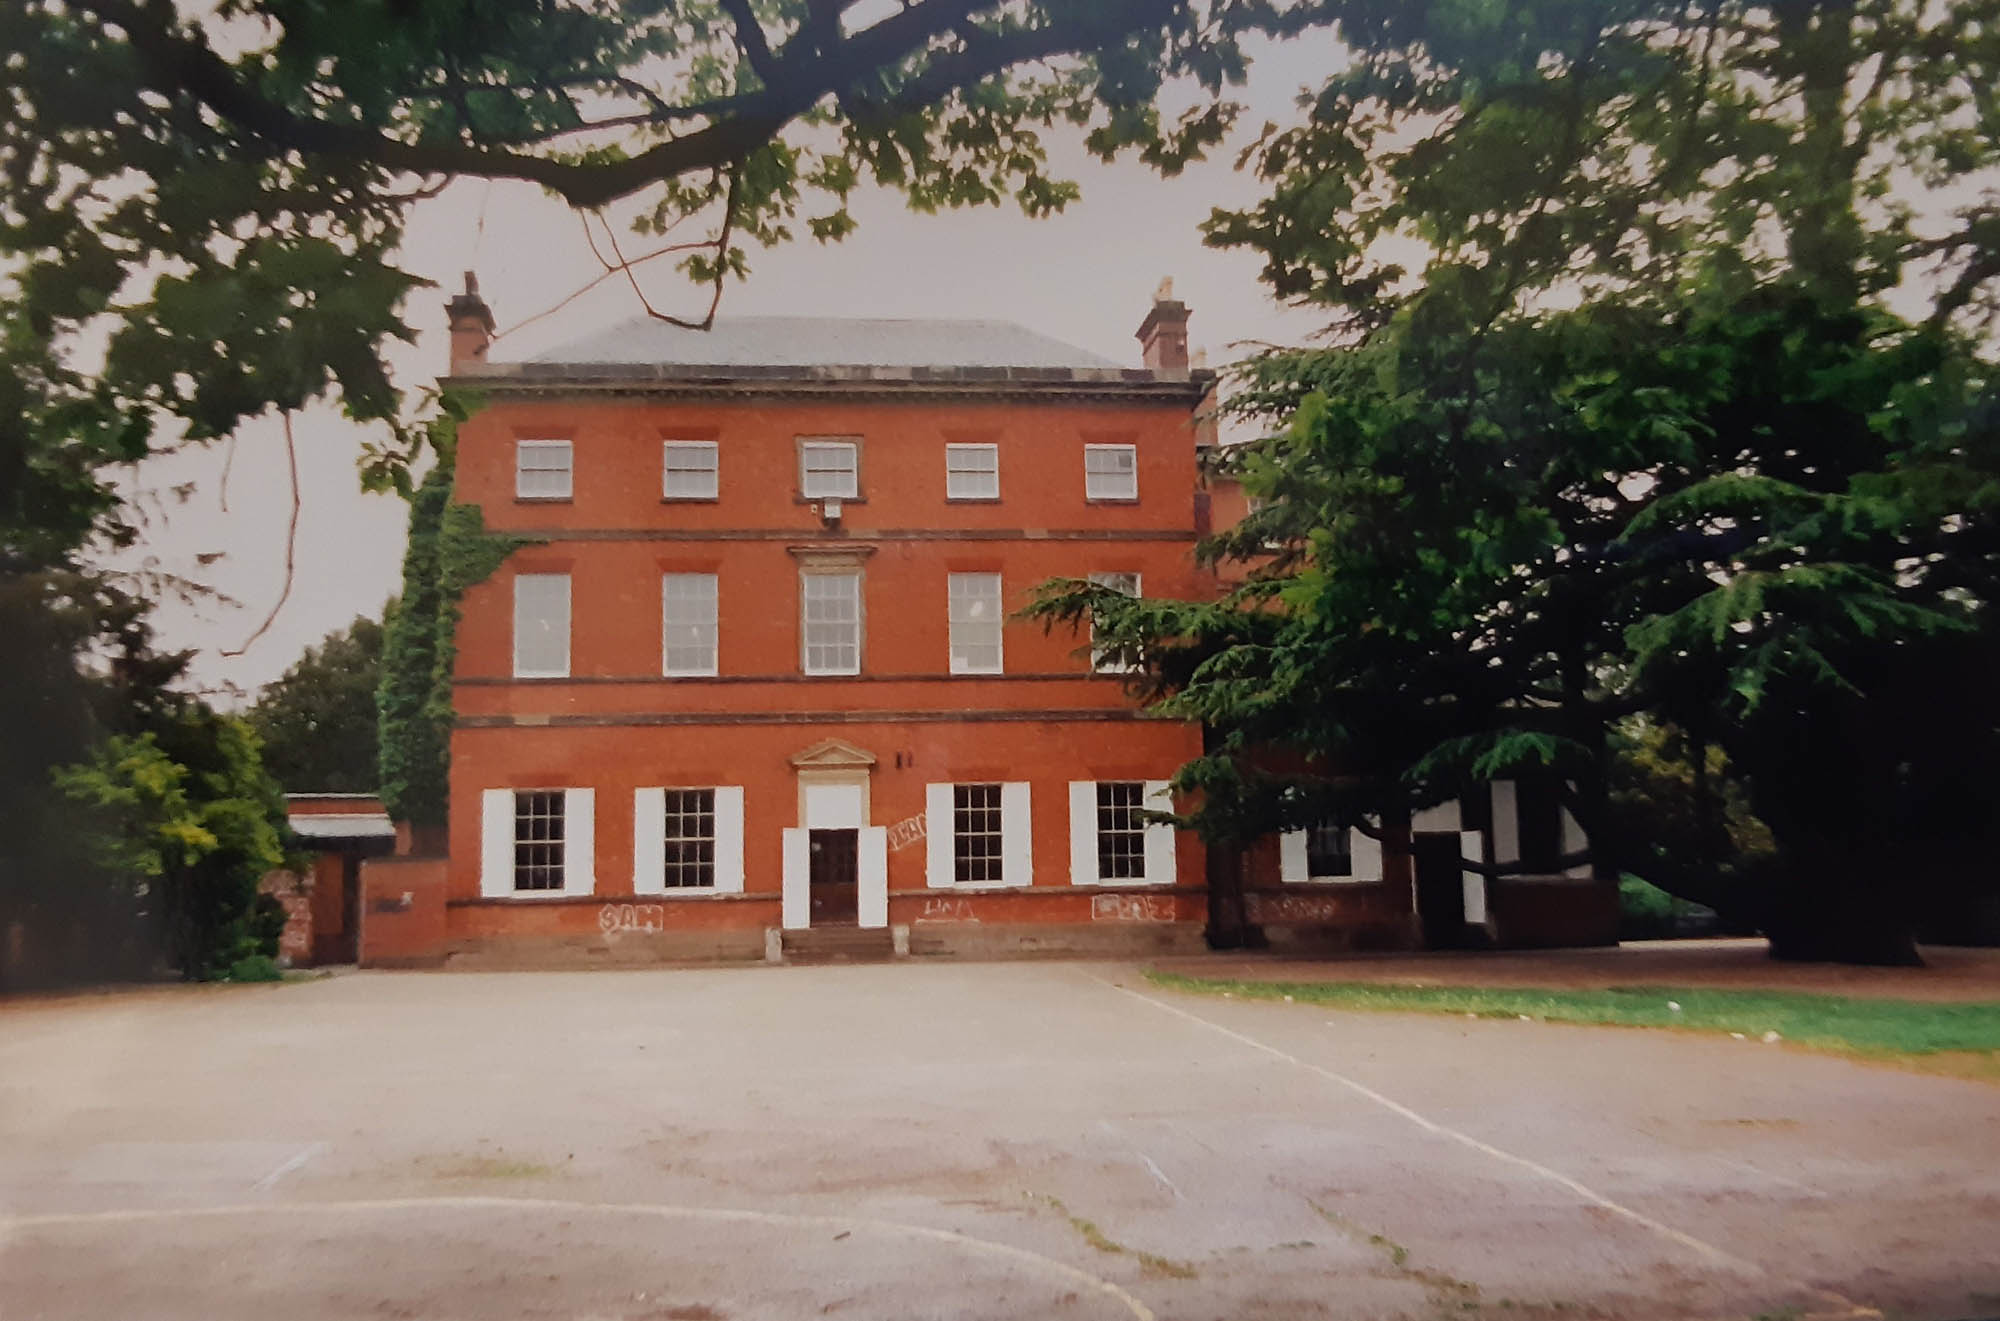 Back of the School in 1996 - Braunstone History Group